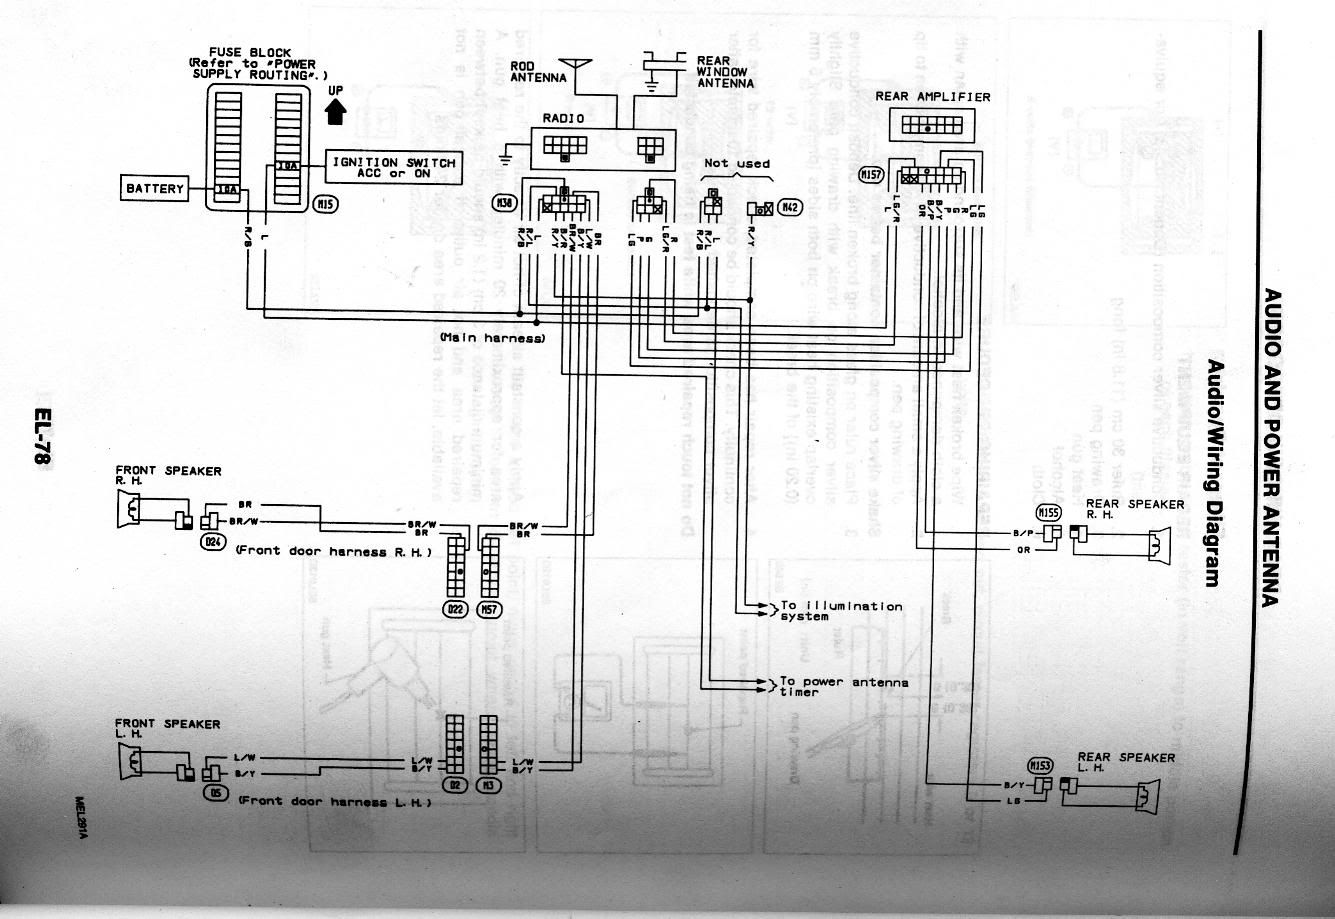 Wiring Diagram For P1000 Motorcycle from img.photobucket.com